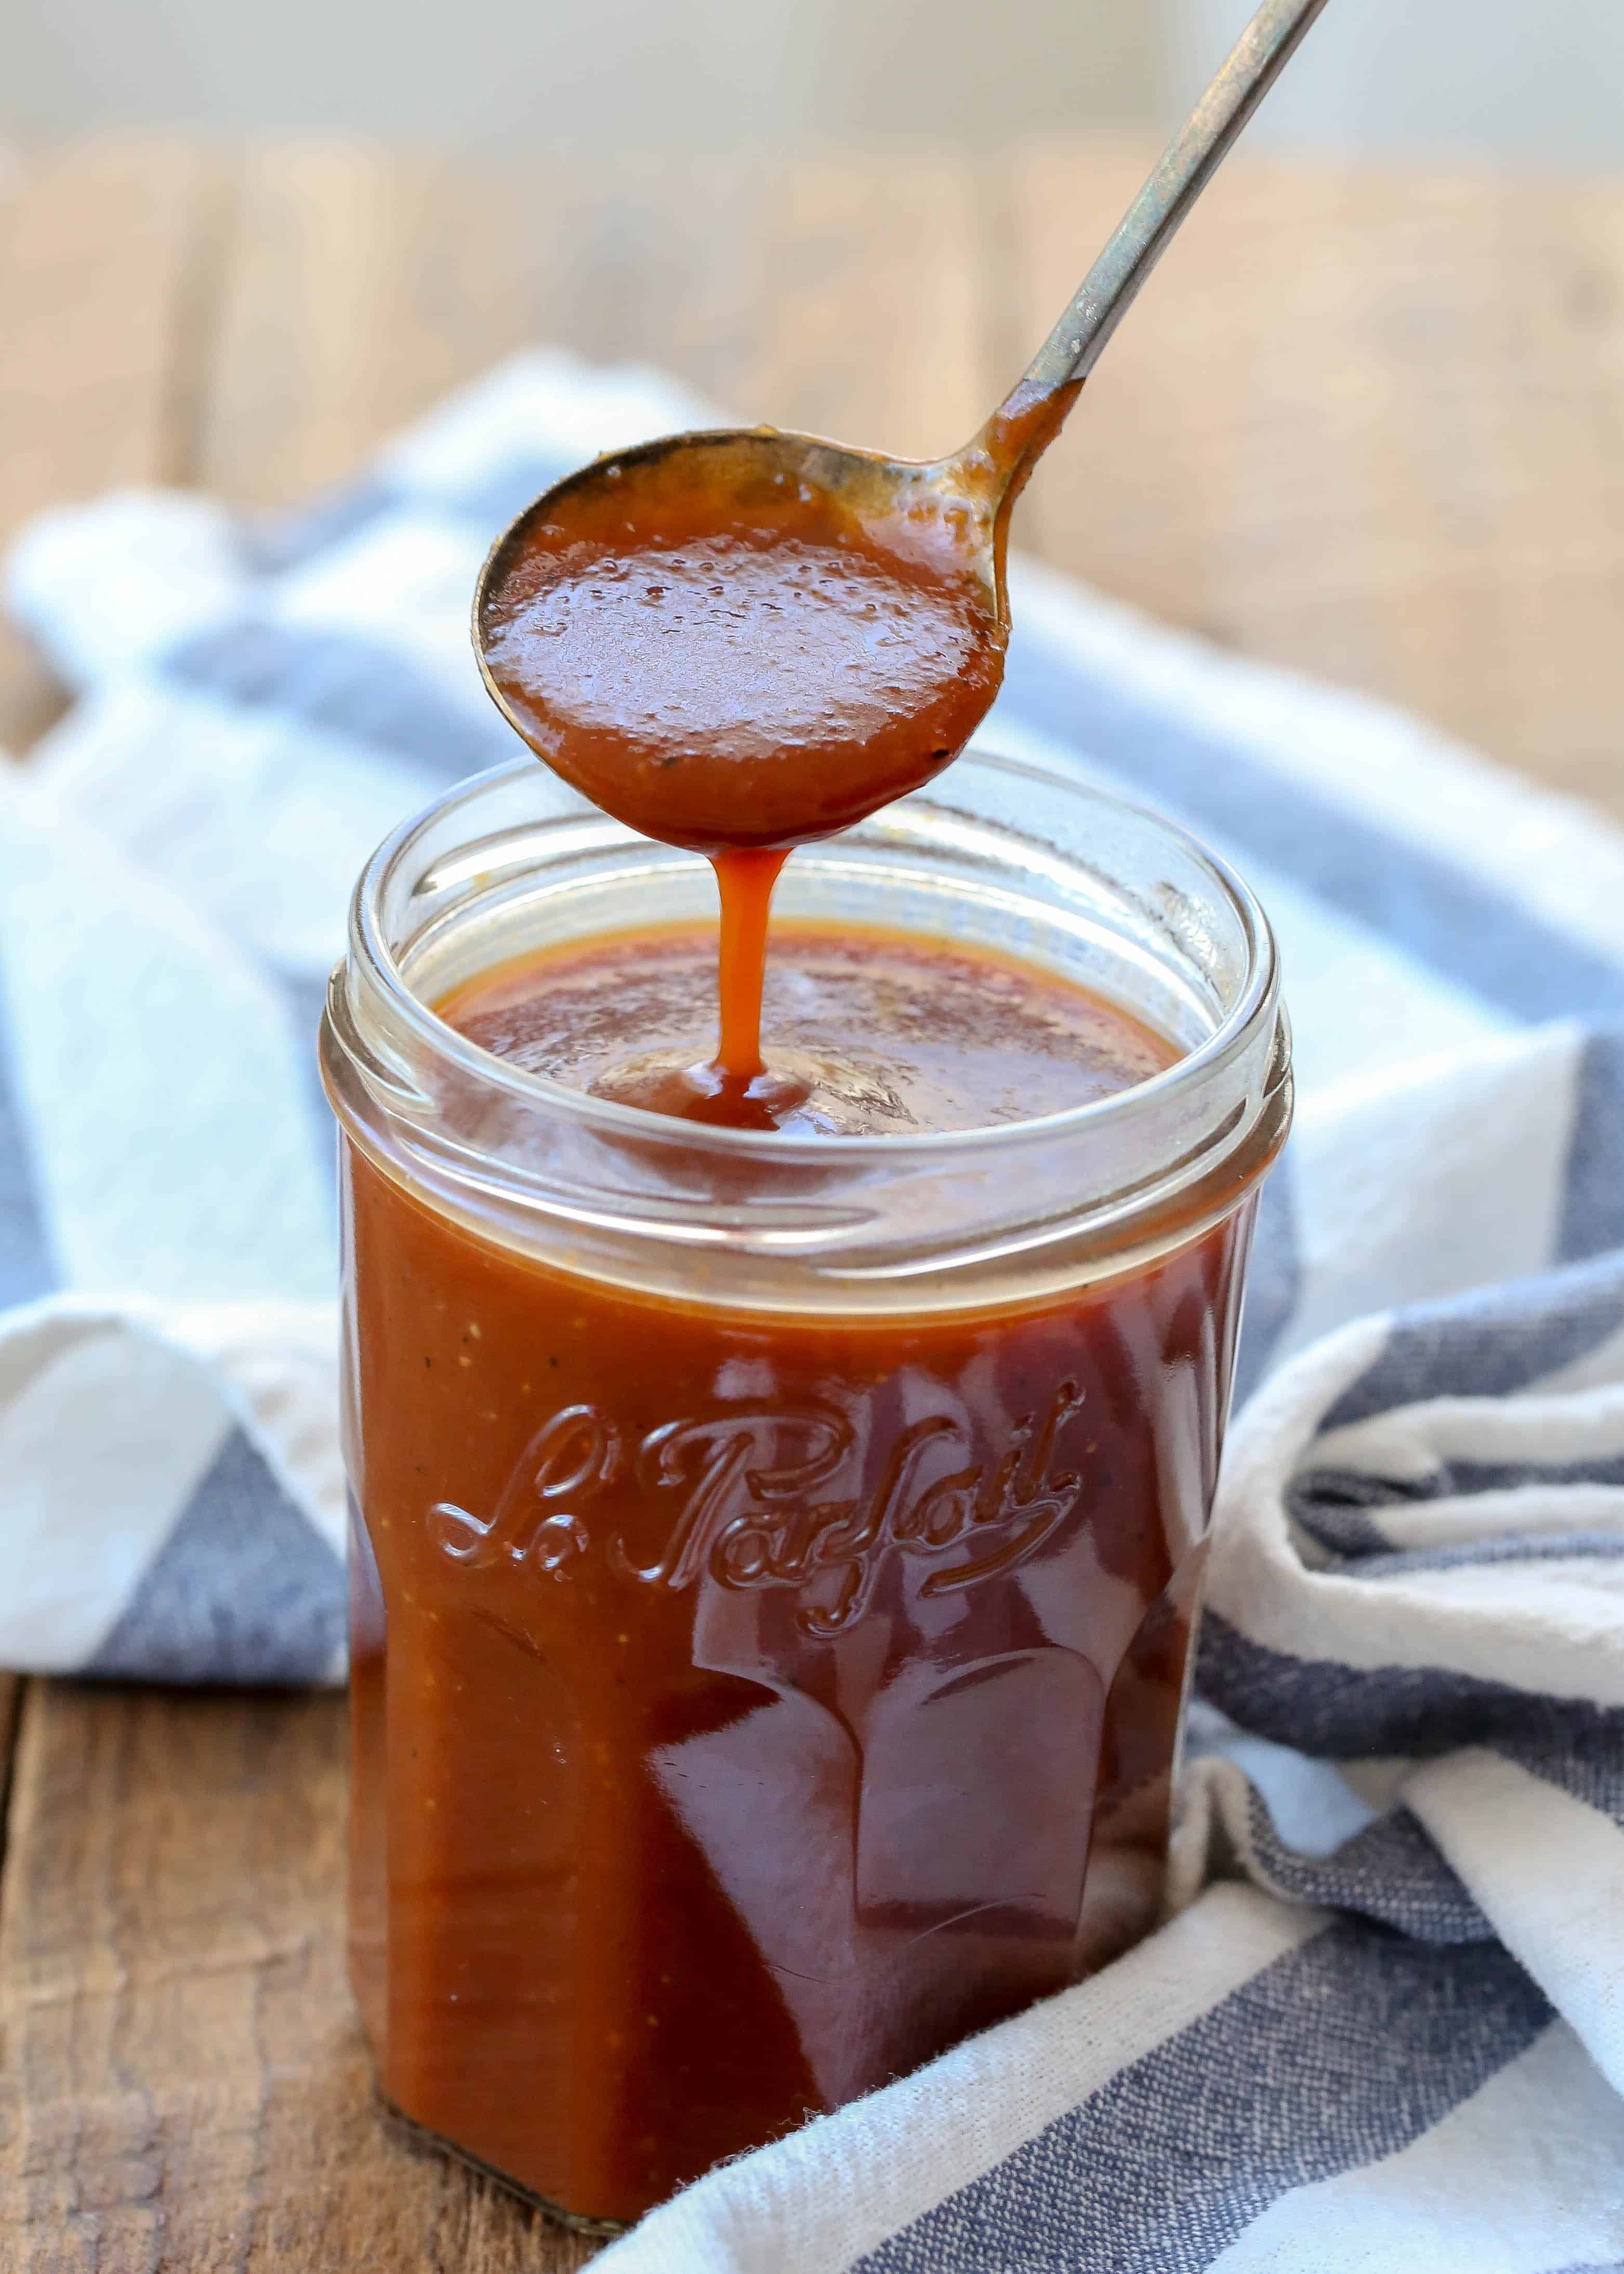 Top 15 Most Shared Memphis Bbq Sauce – Easy Recipes To Make at Home